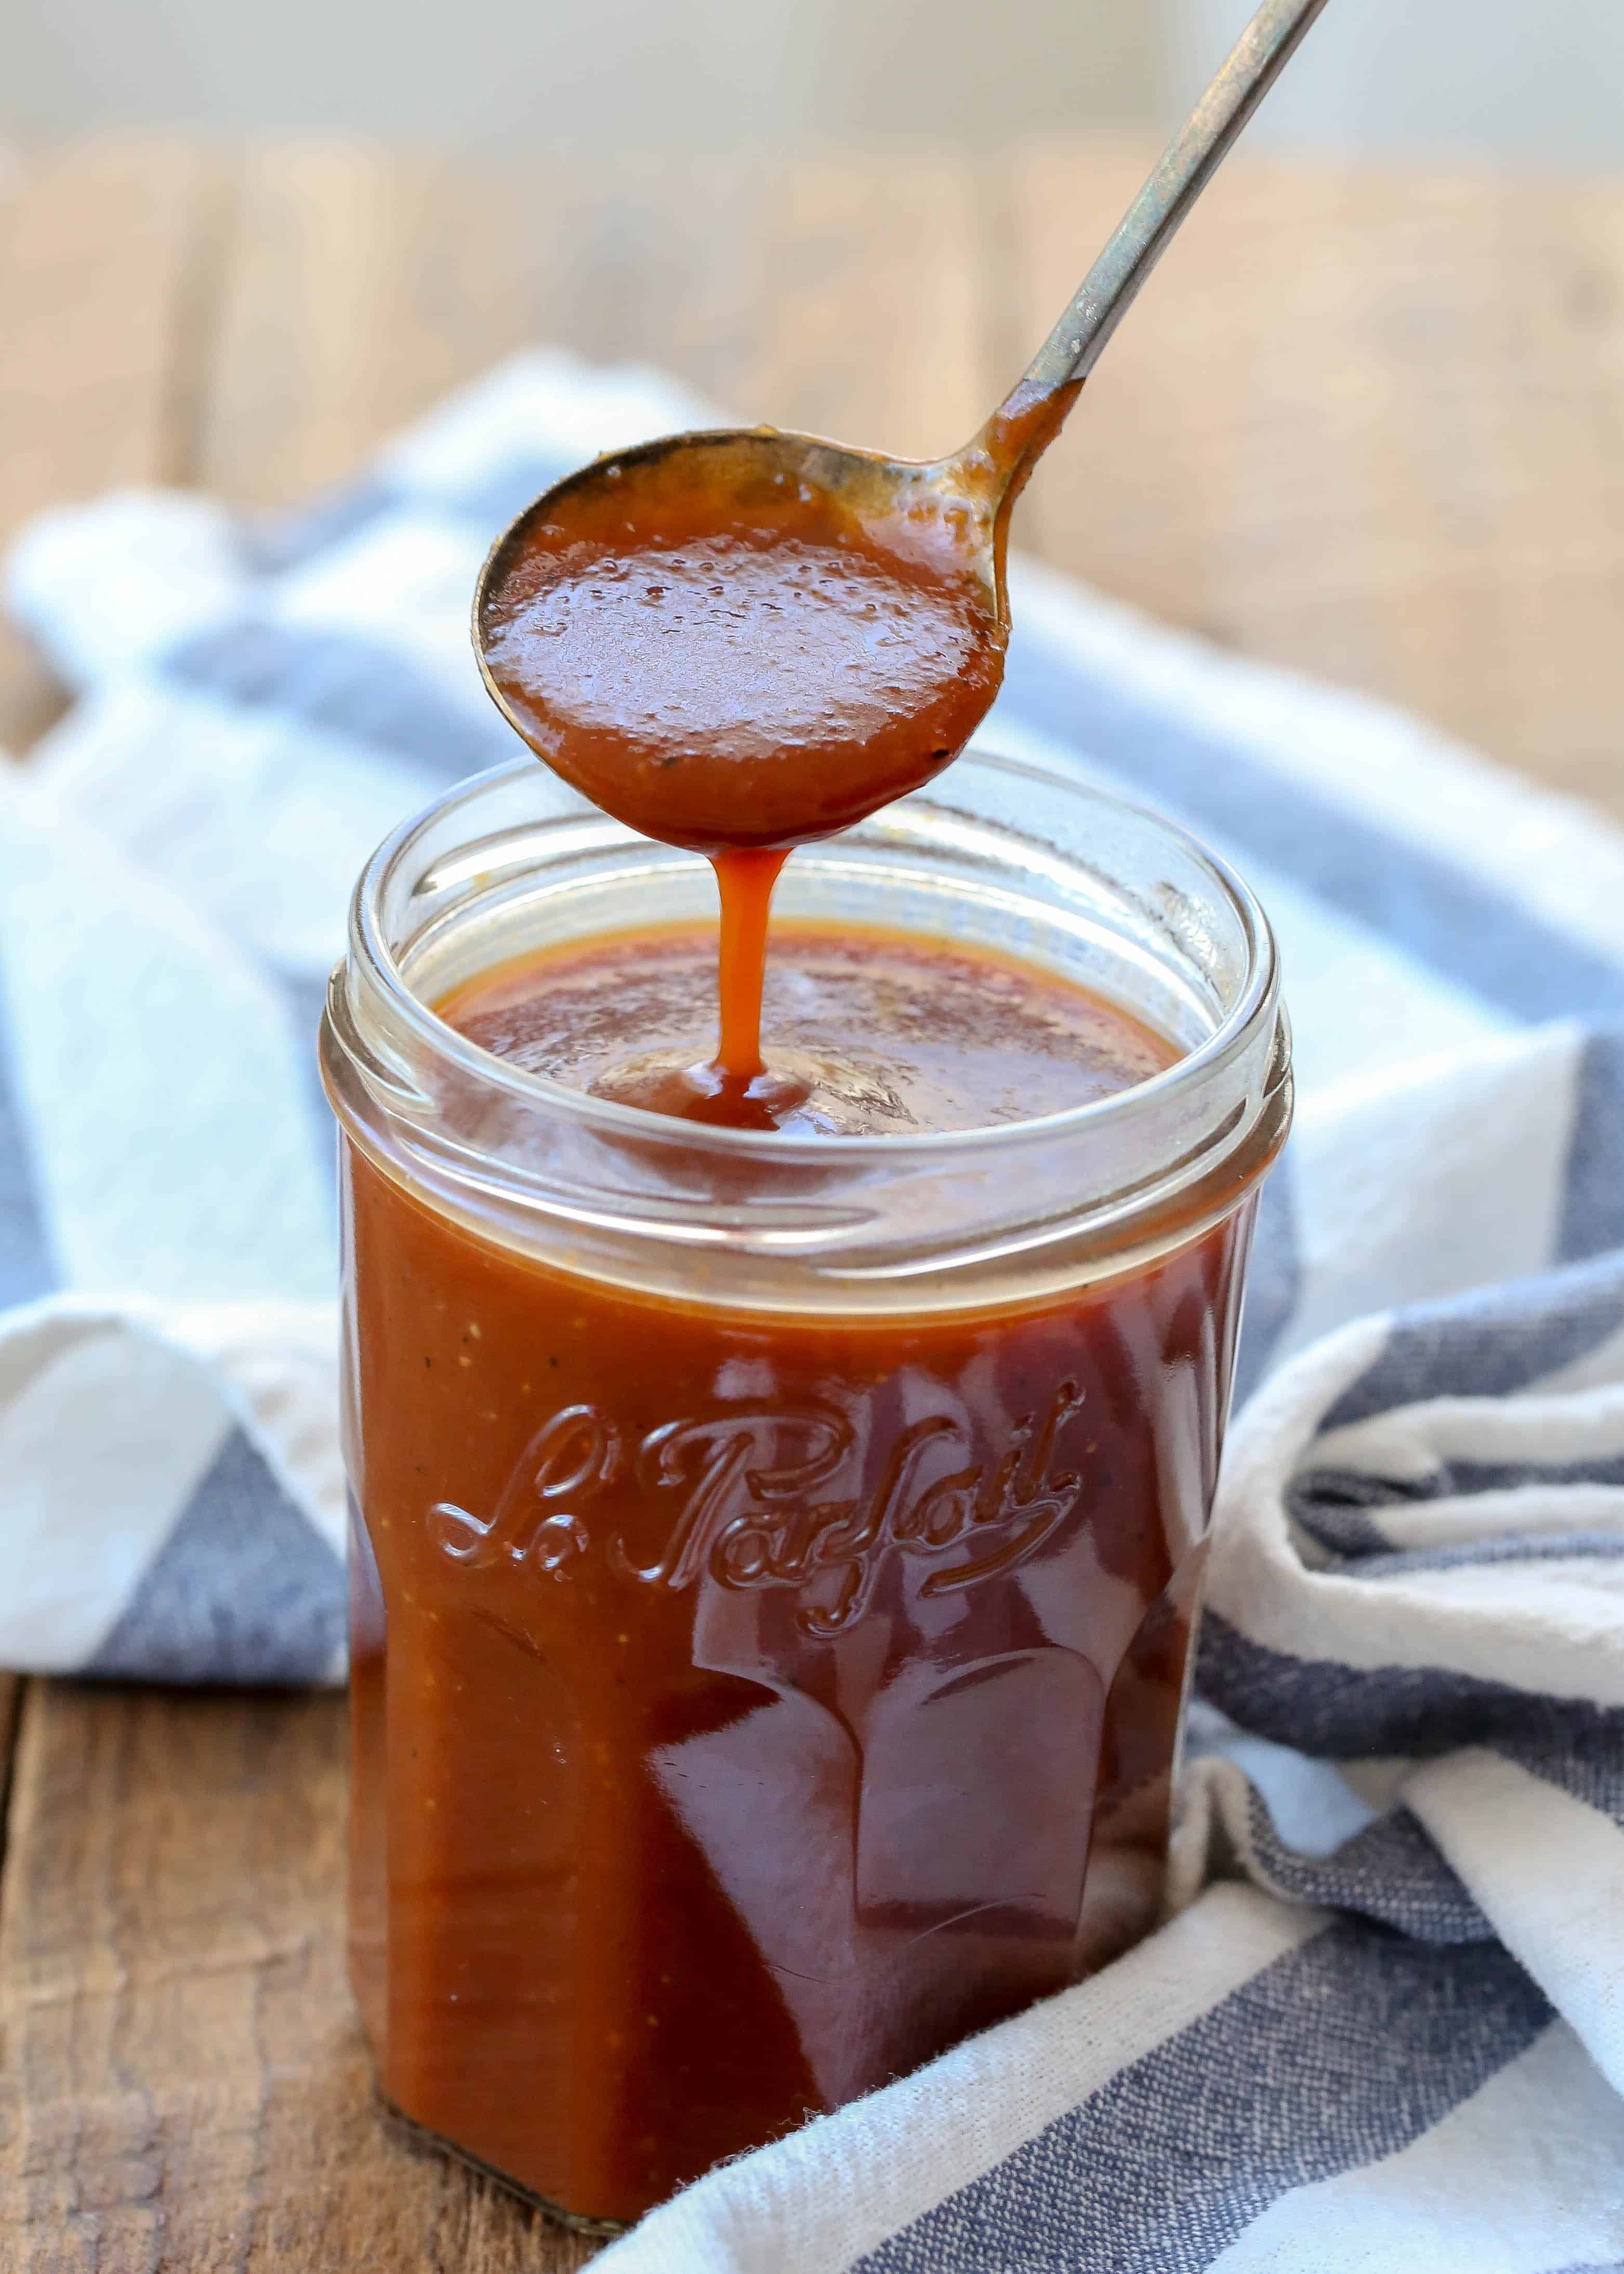 Top 15 Most Shared Memphis Bbq Sauce – Easy Recipes To Make at Home